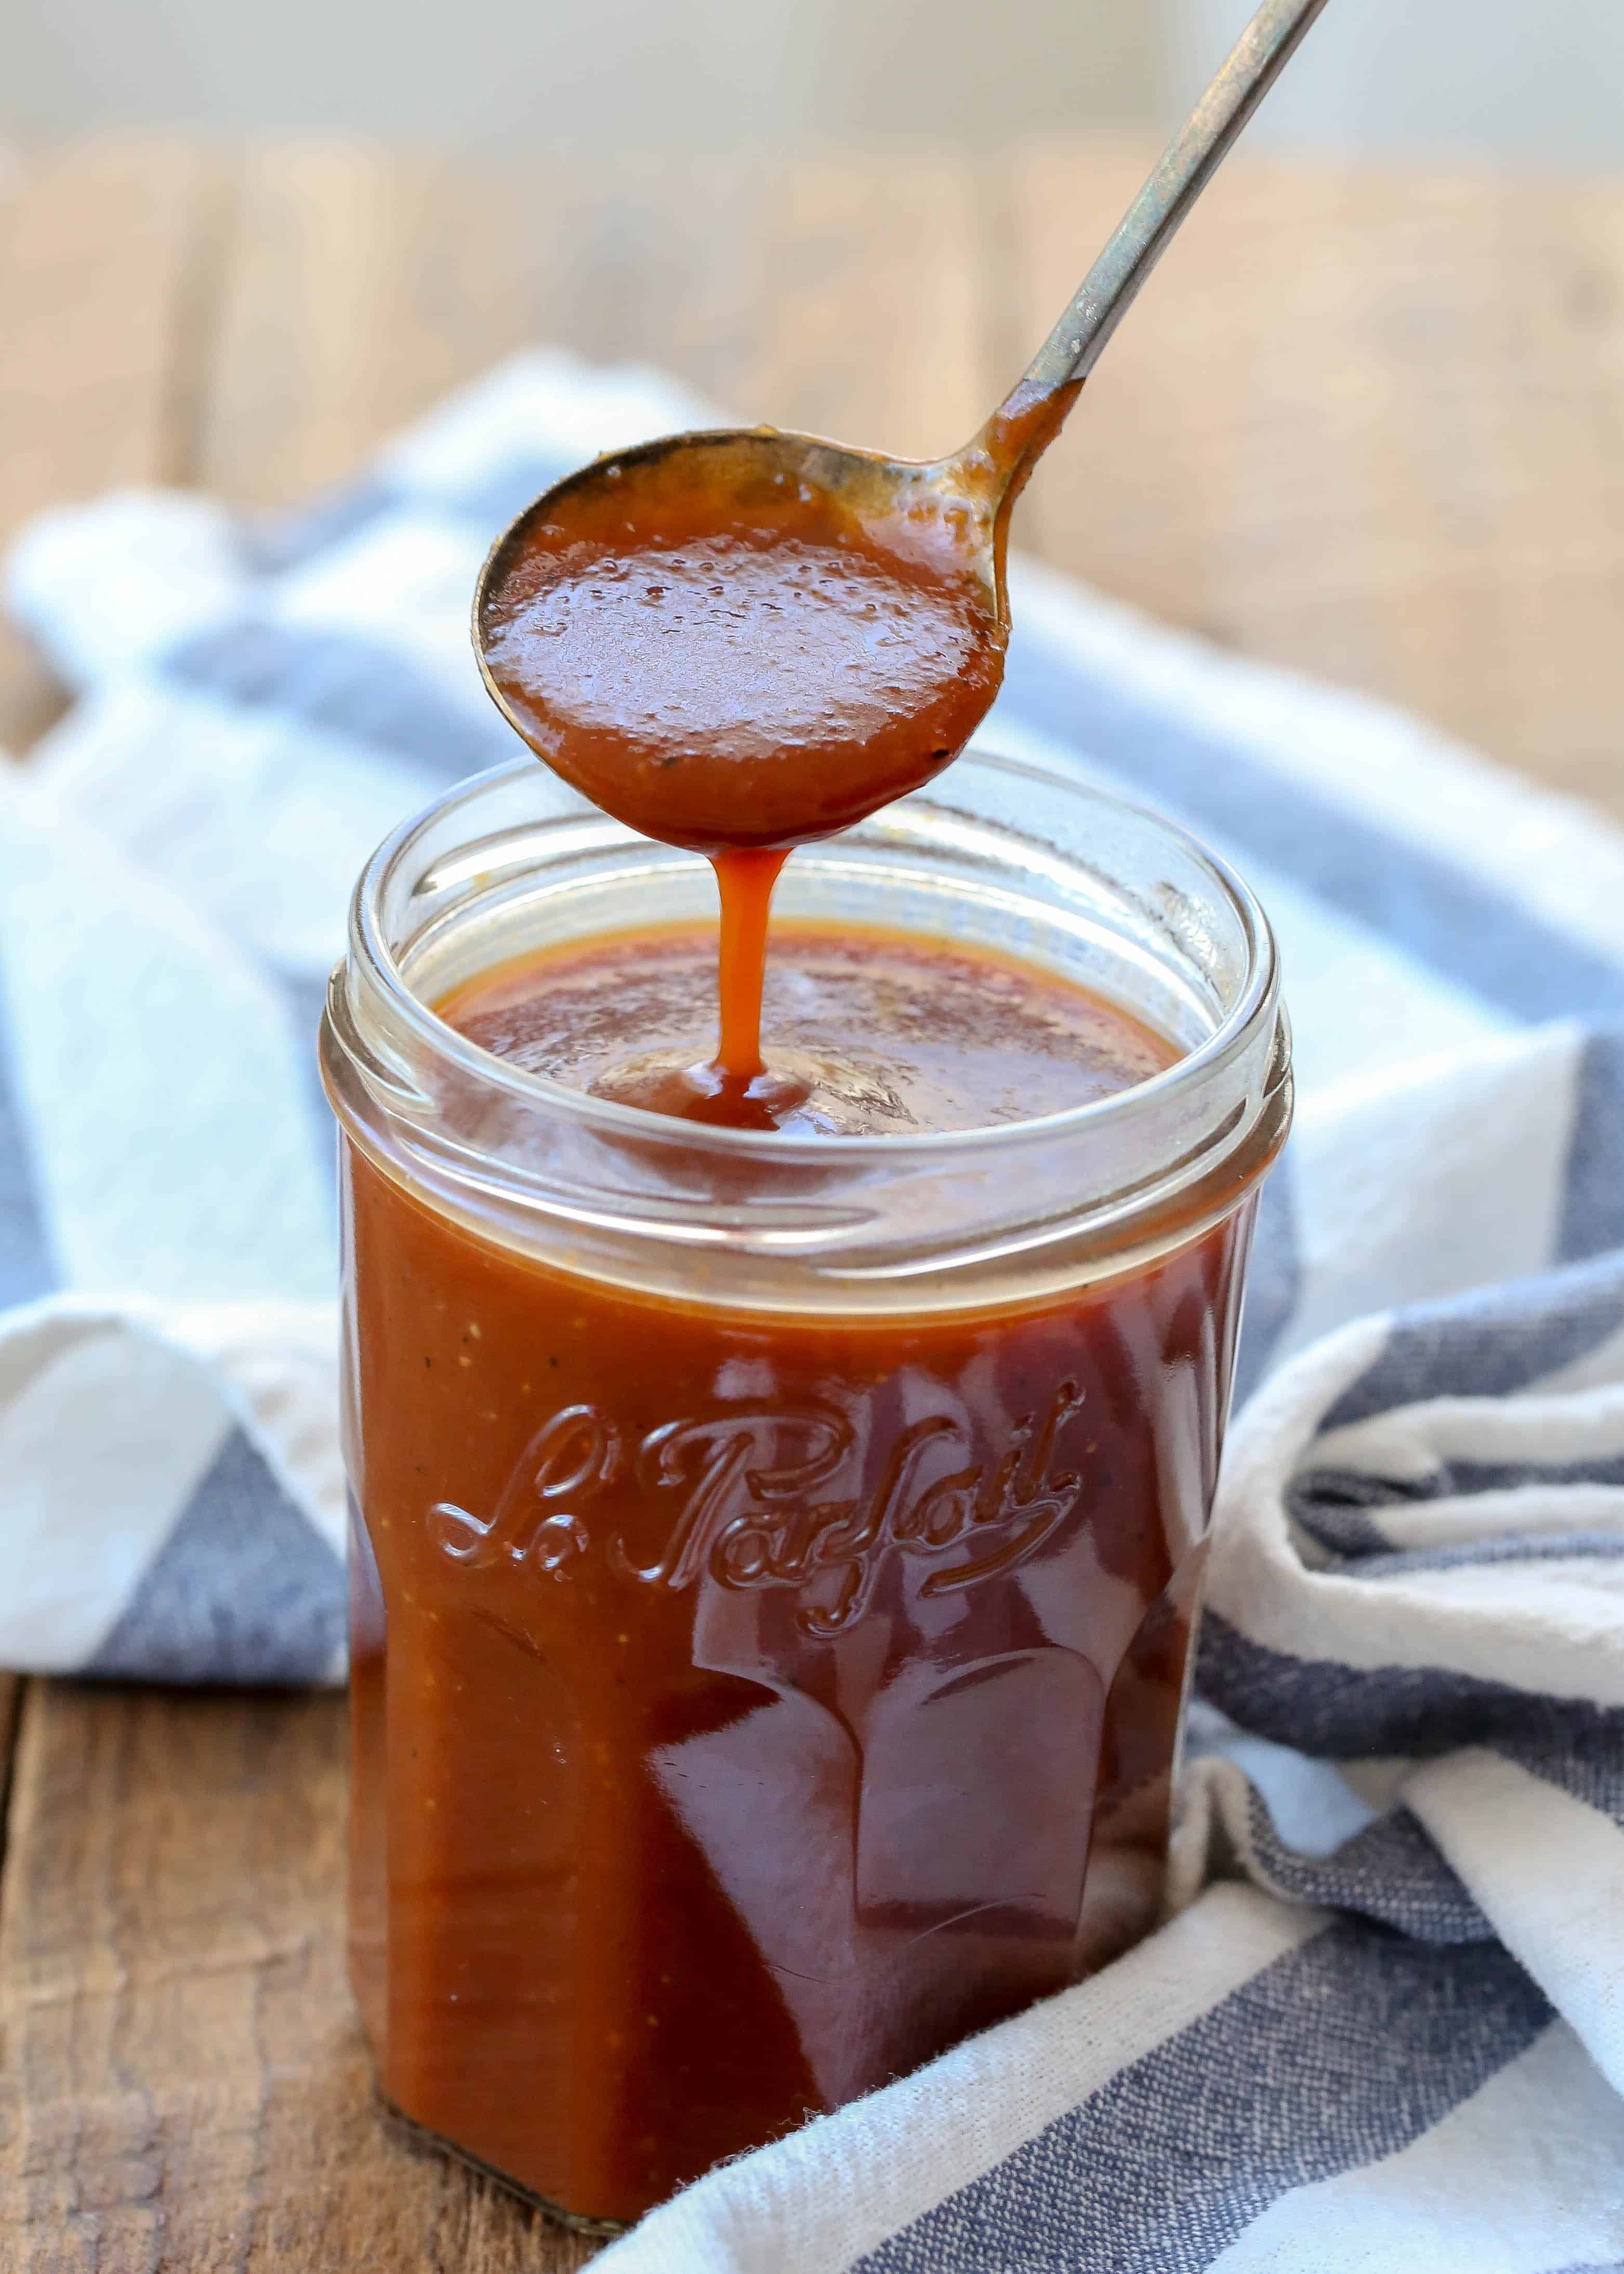 Top 15 Most Shared Memphis Bbq Sauce – Easy Recipes To Make at Home